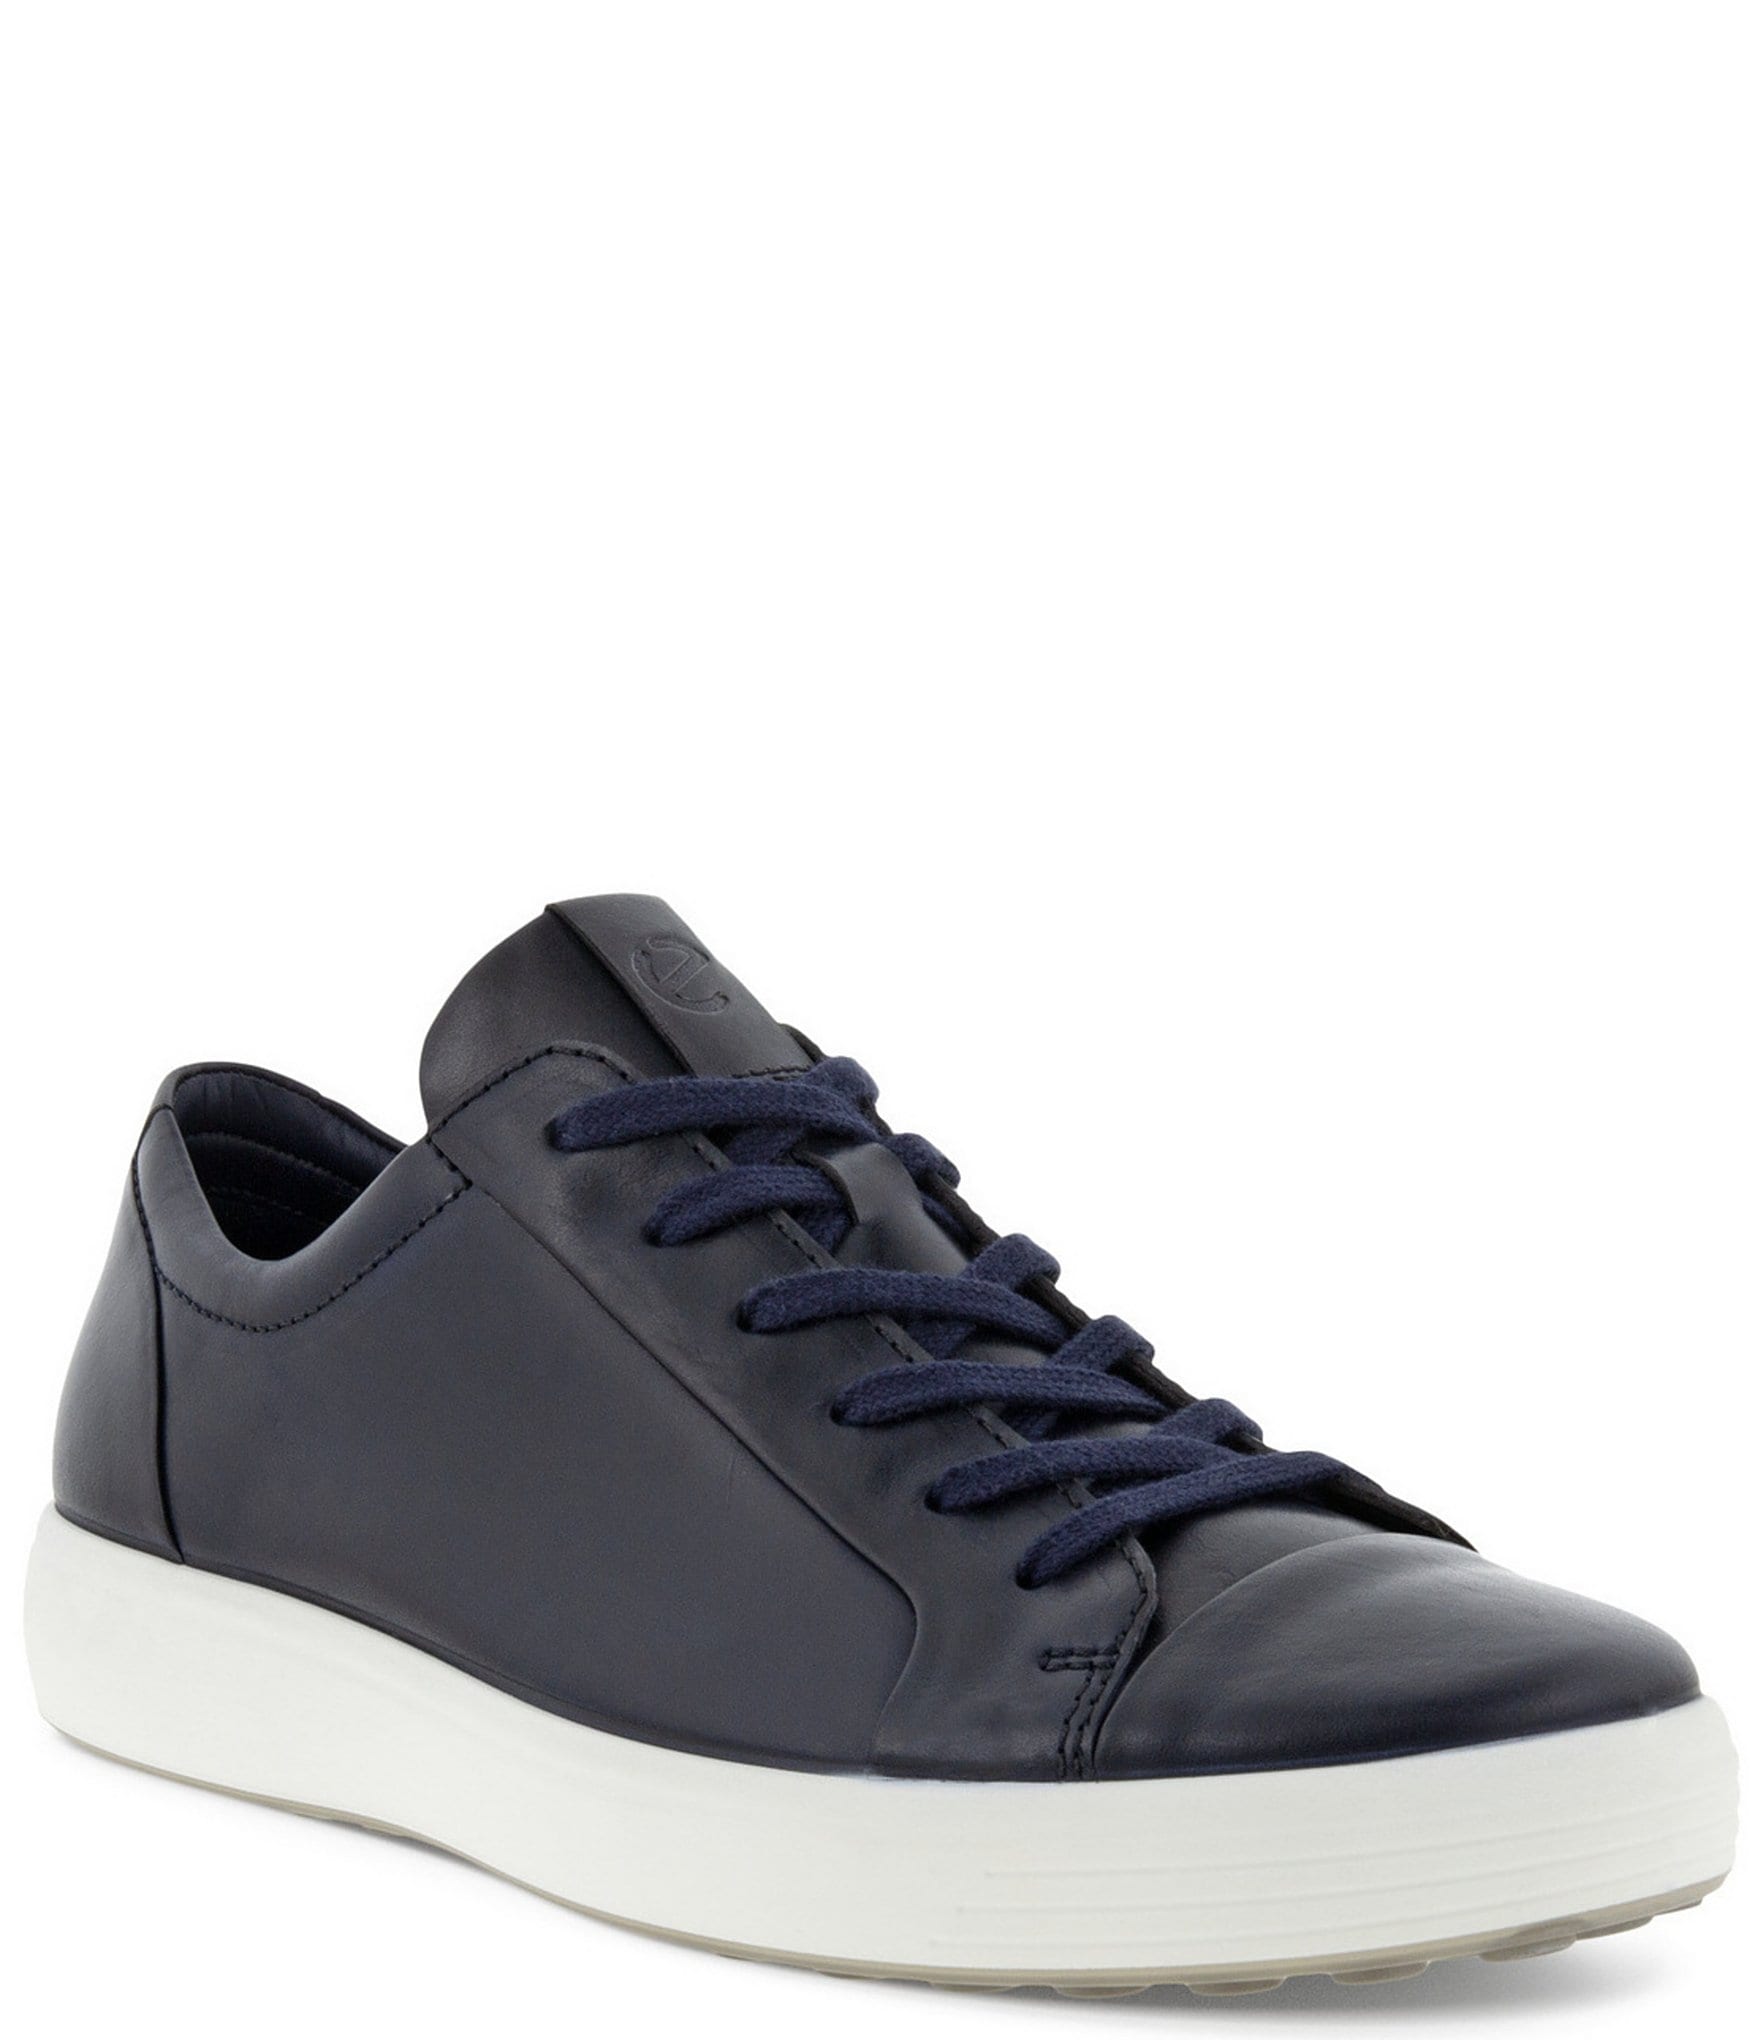 ECCO Men's Soft 7 City Leather Lace-Up Sneakers | Dillard's